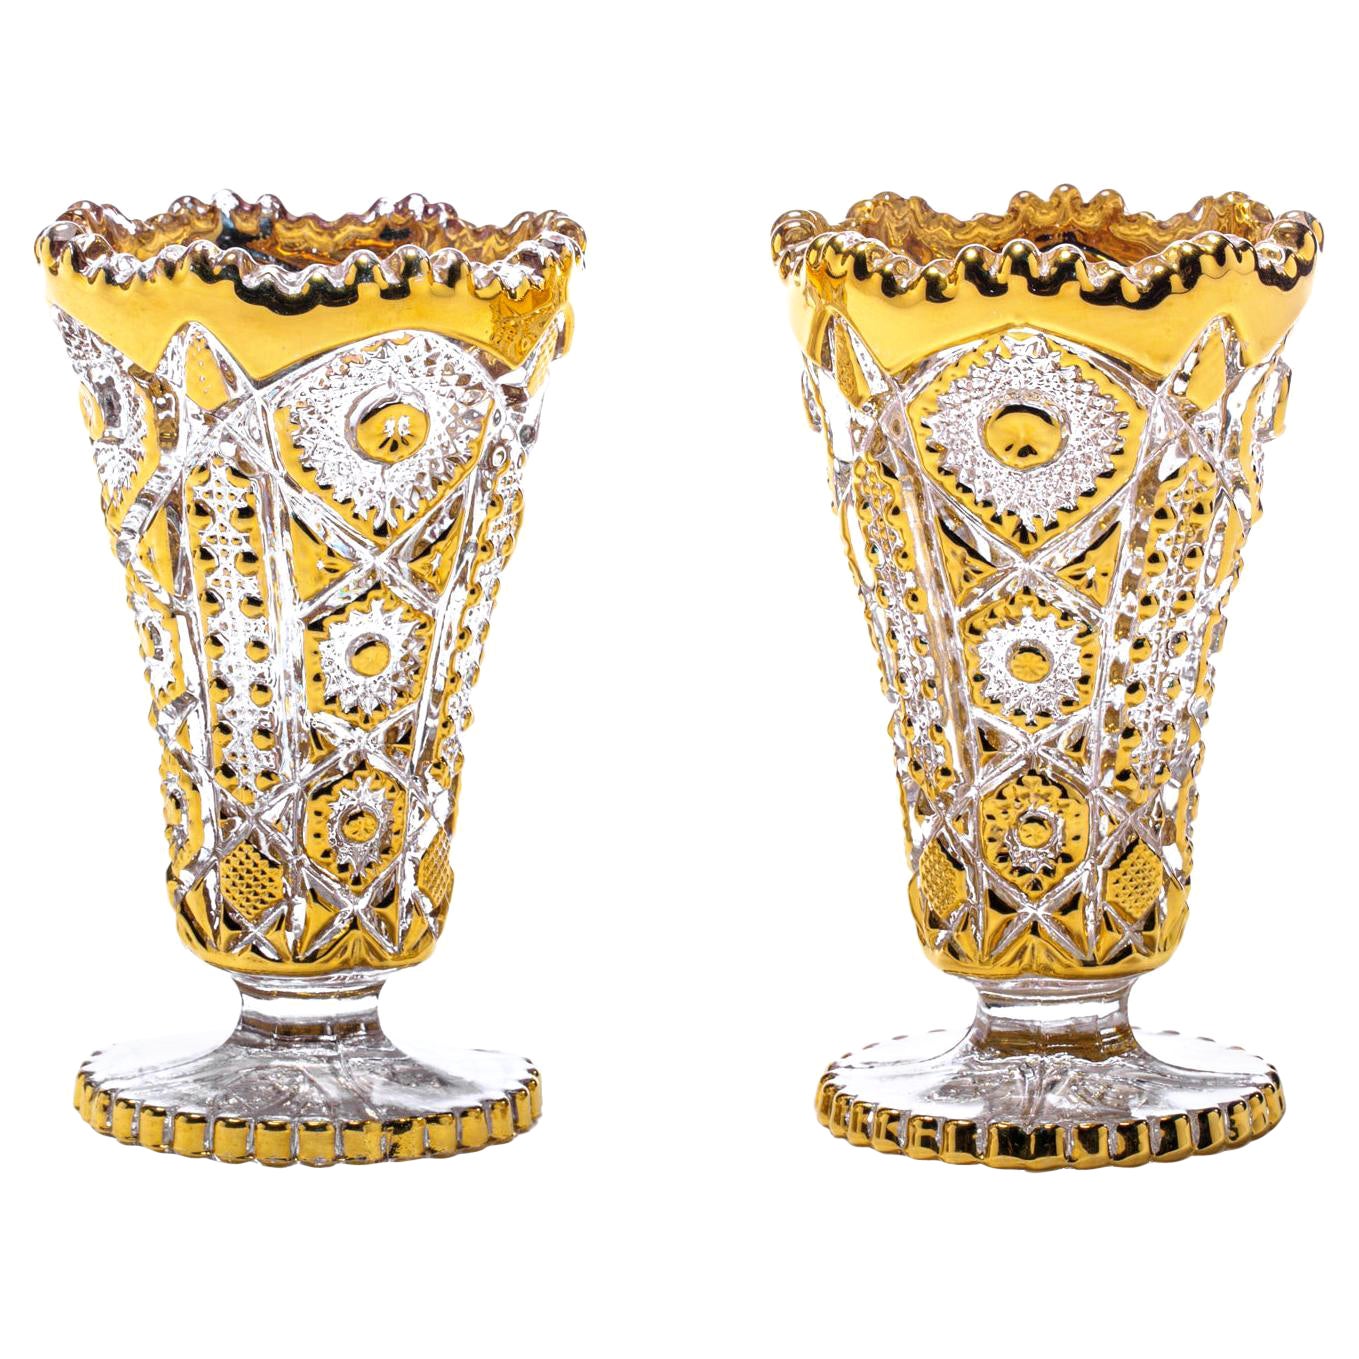 Pair of Hollywood Regency 22k Gold Painted Vases by Imperial Glass Co. c. 1965